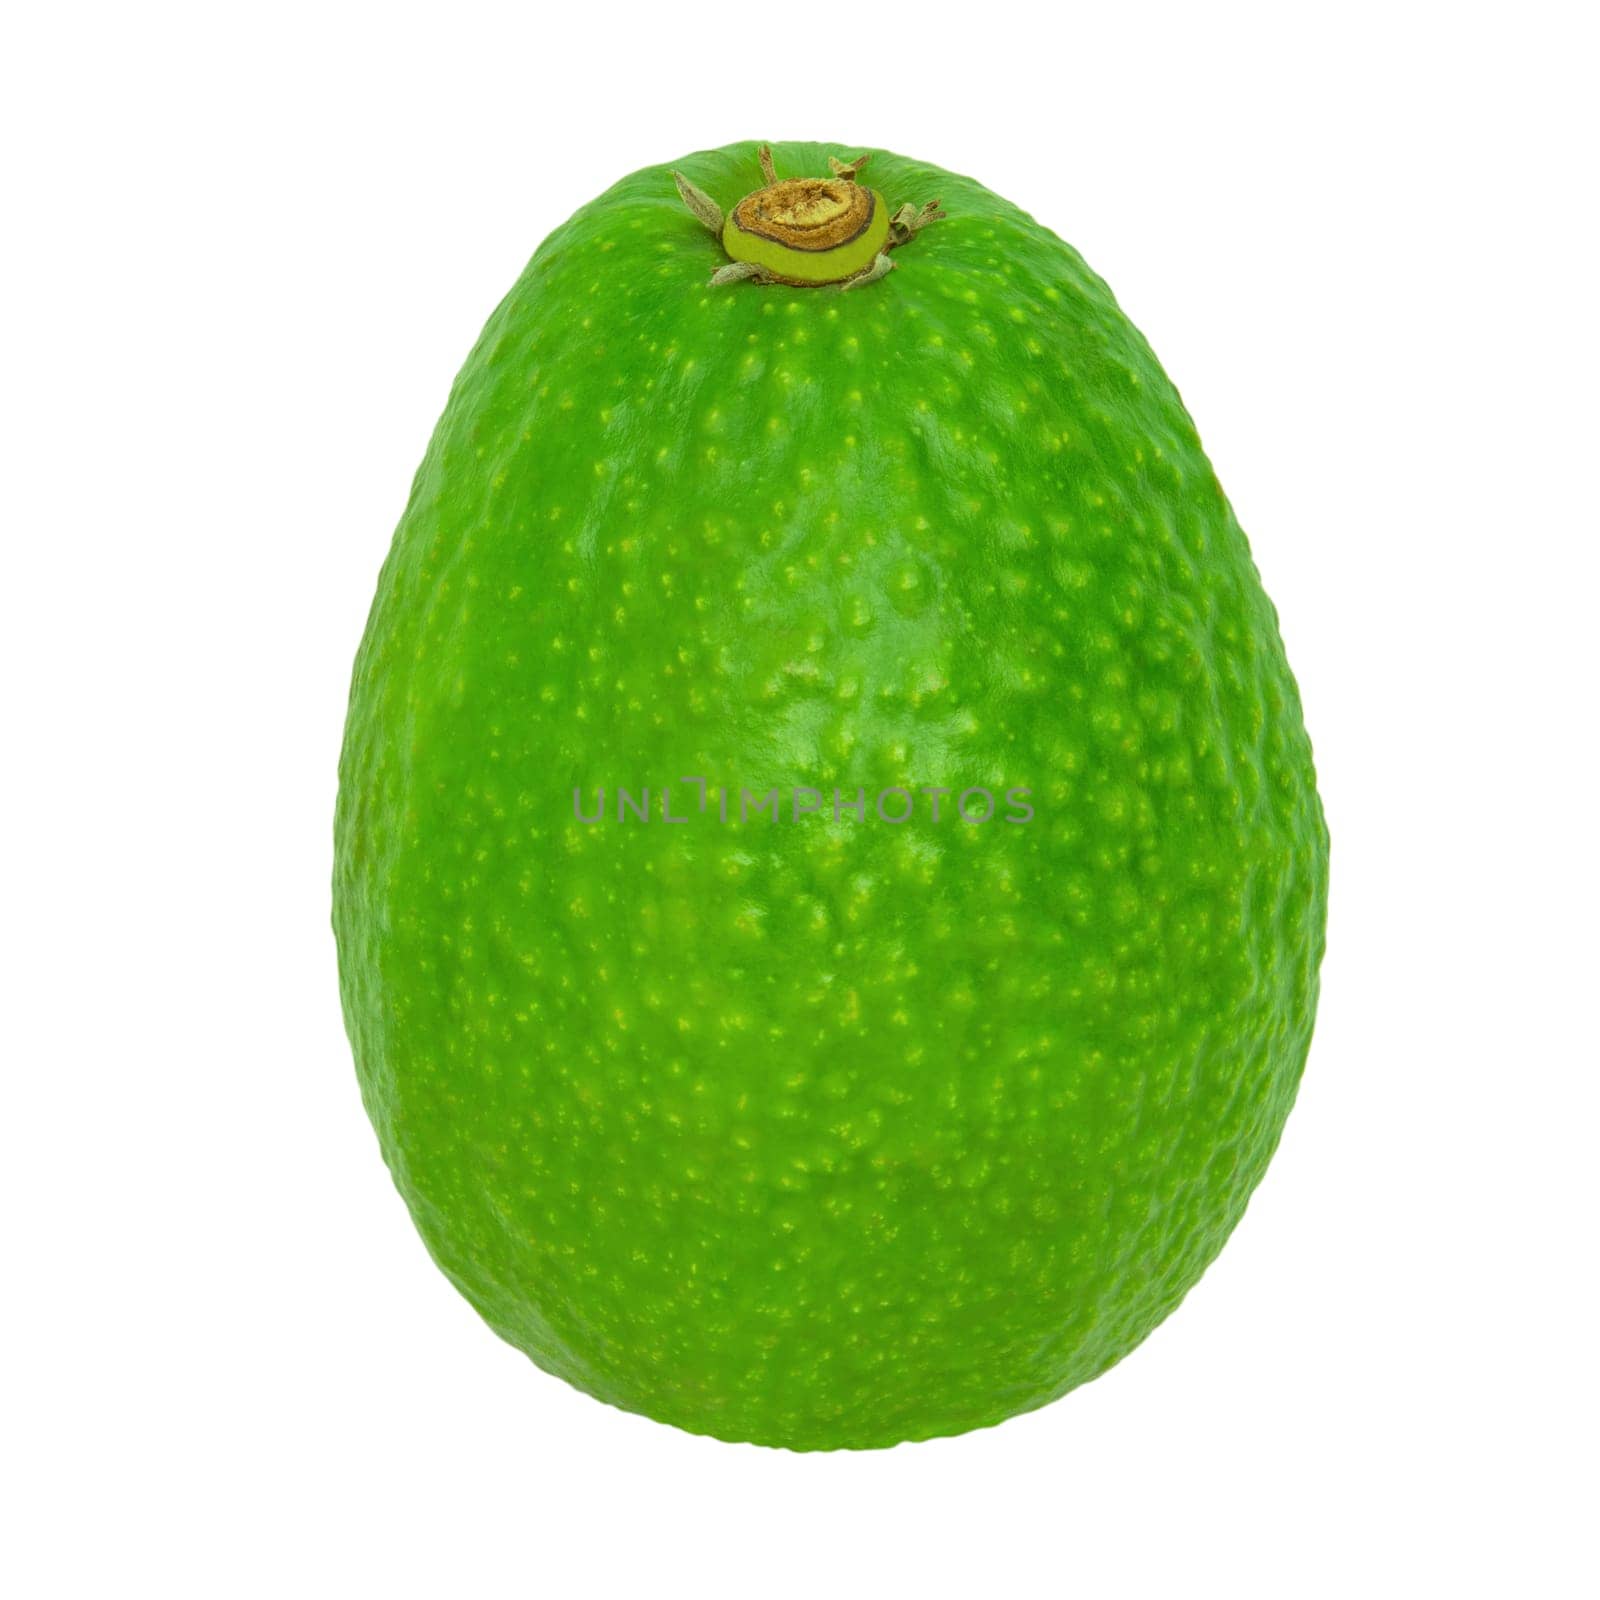 Green avocado isolated on a white background. Stock photography by anna_artist